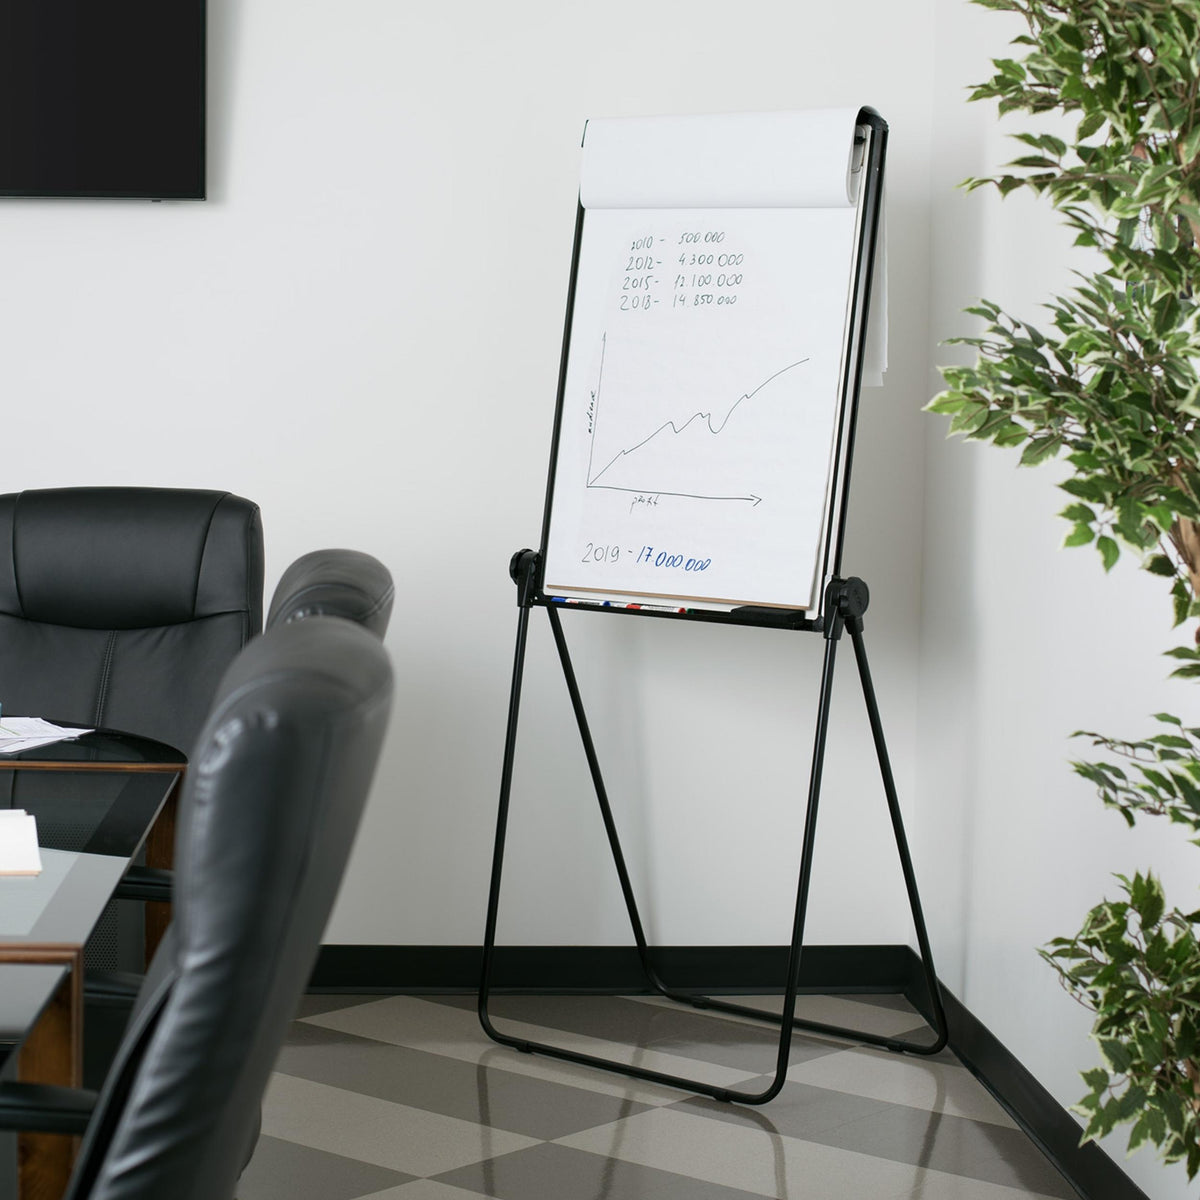 Docupoint Dry Erase Height Adjustable Portable Meeting Easel – artograph